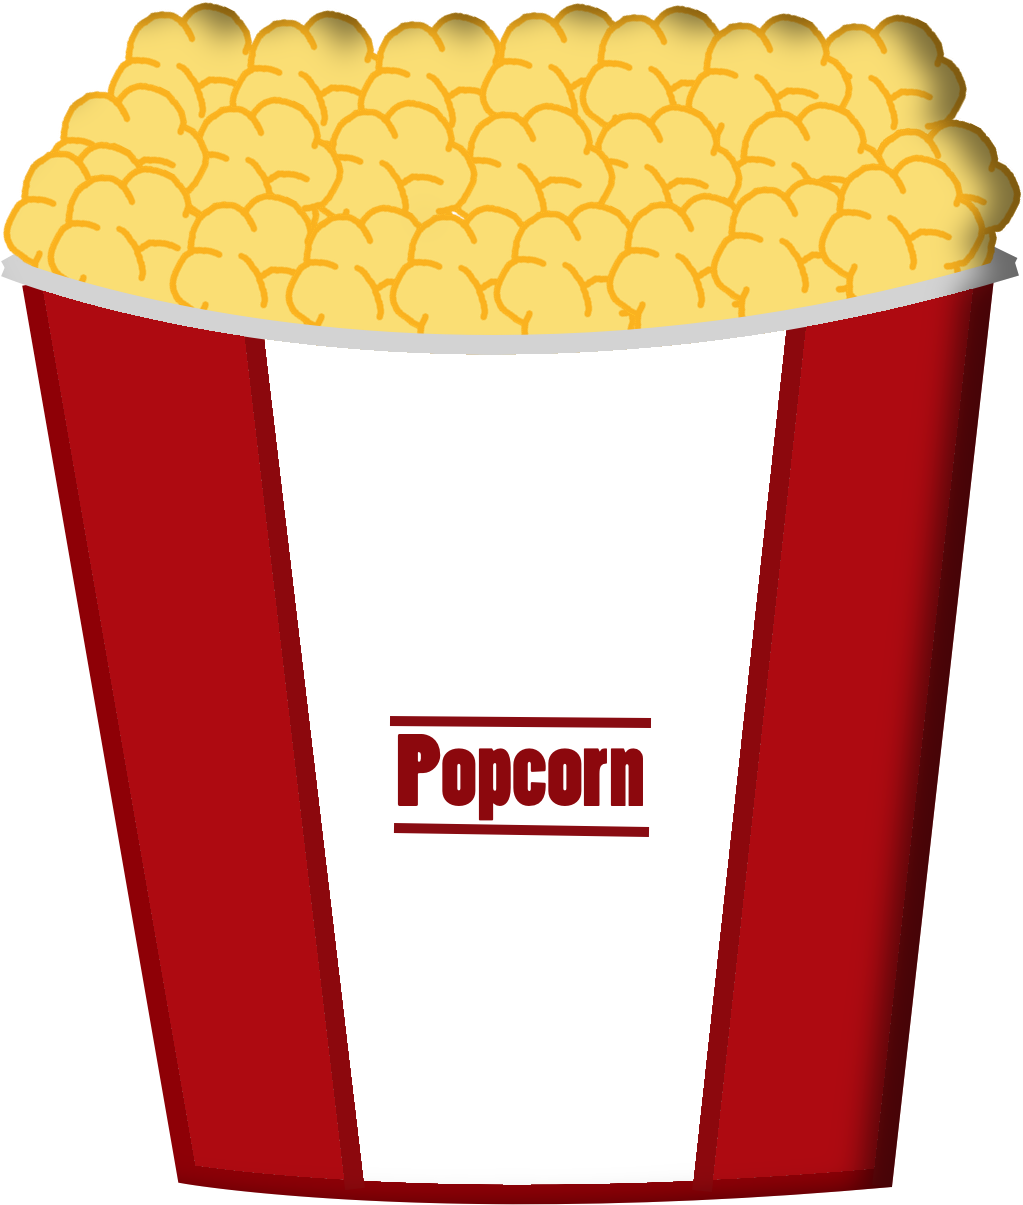 Transparent png pictures icons. Clipart free popcorn